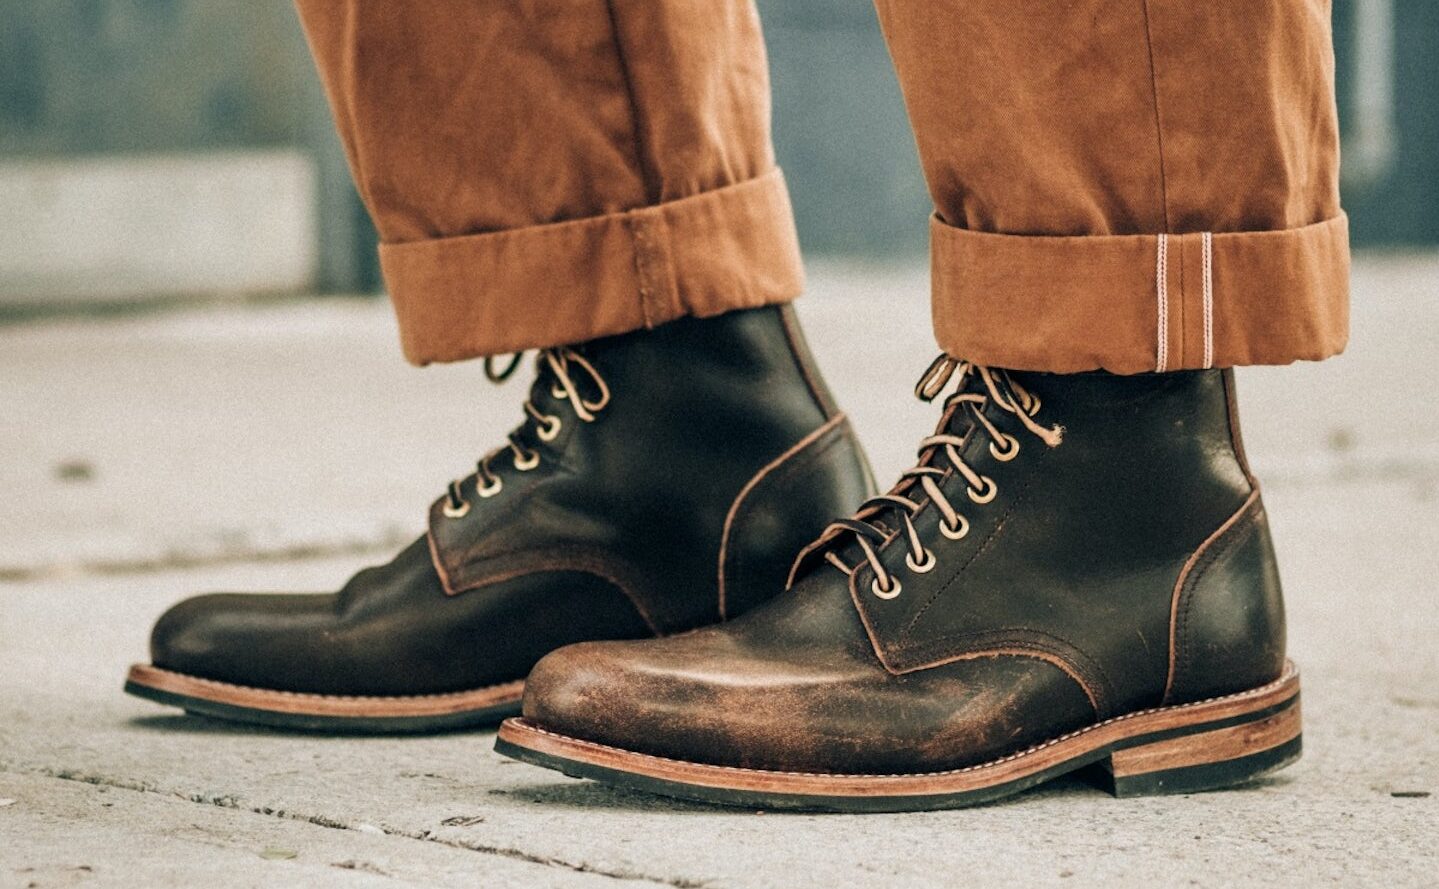 Need A Last-Minute Pair For The Thunderdome? We’ve Got the Patina-Ready ...